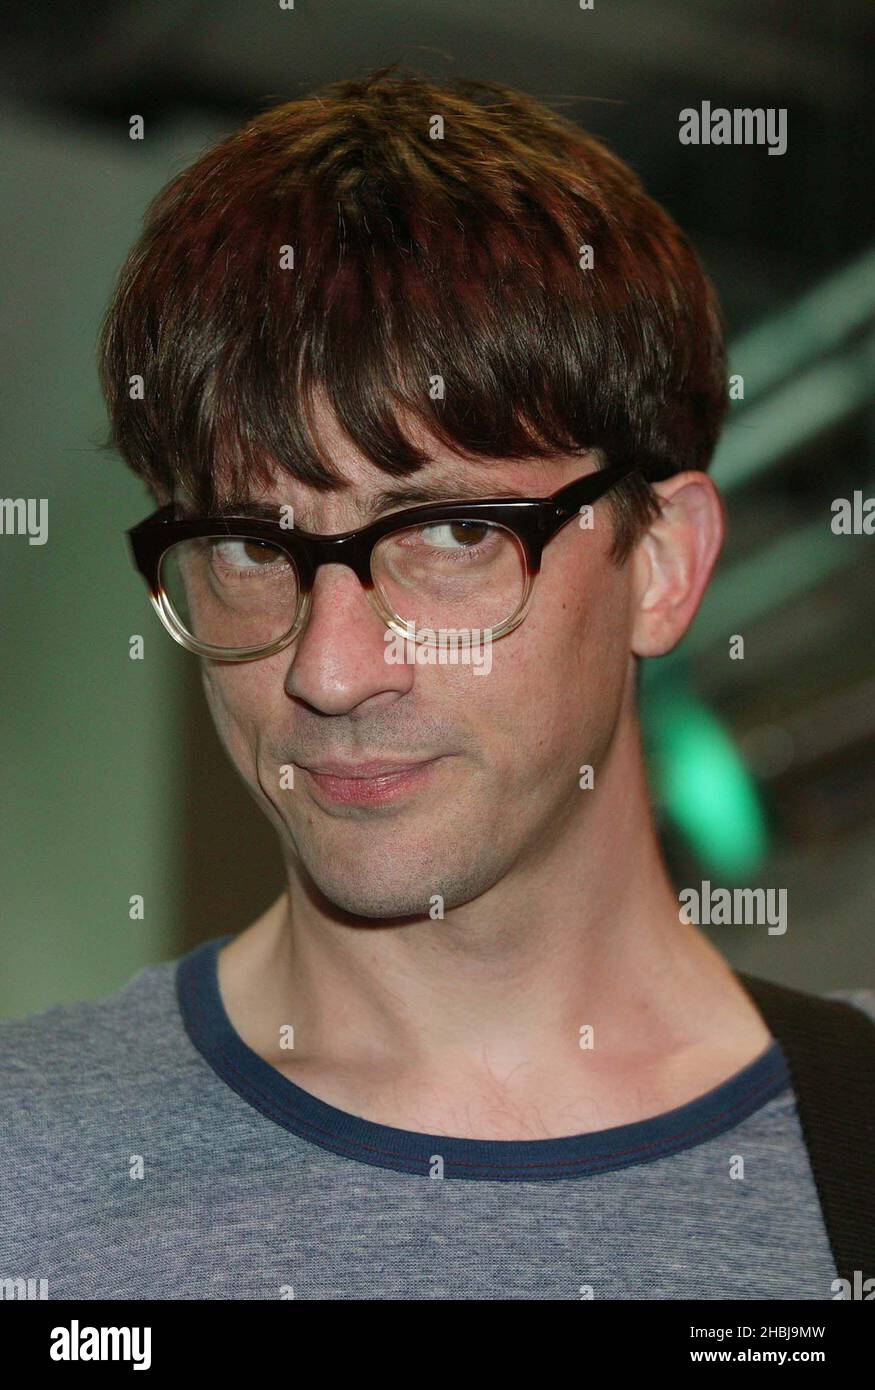 Former Blur guitarist Graham Coxon performs live free gig featuring songs from his new album 'Happiness In Magazines' at the HMV Oxford Street, London. Stock Photo